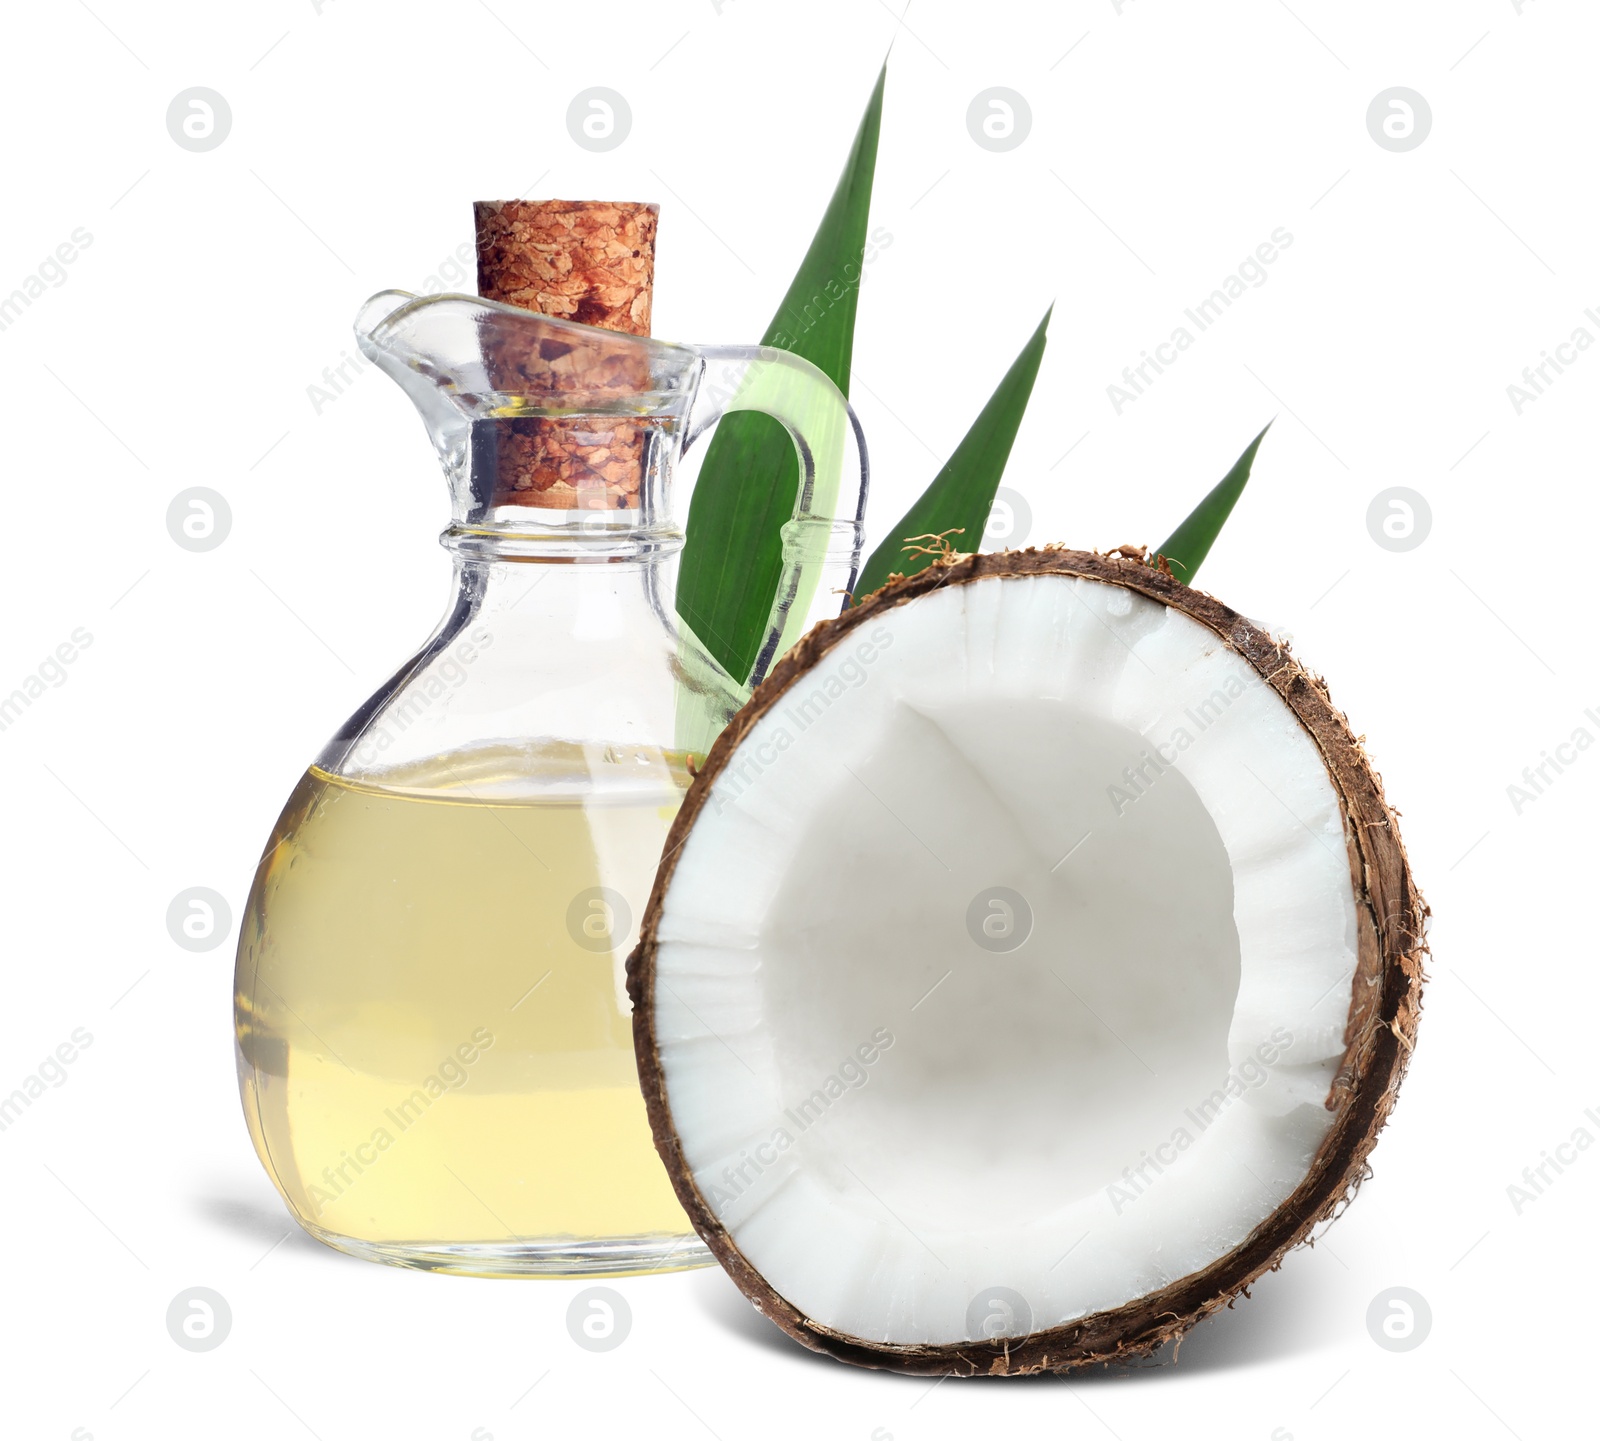 Image of Bottle of coconut cooking oil and fruit on white background